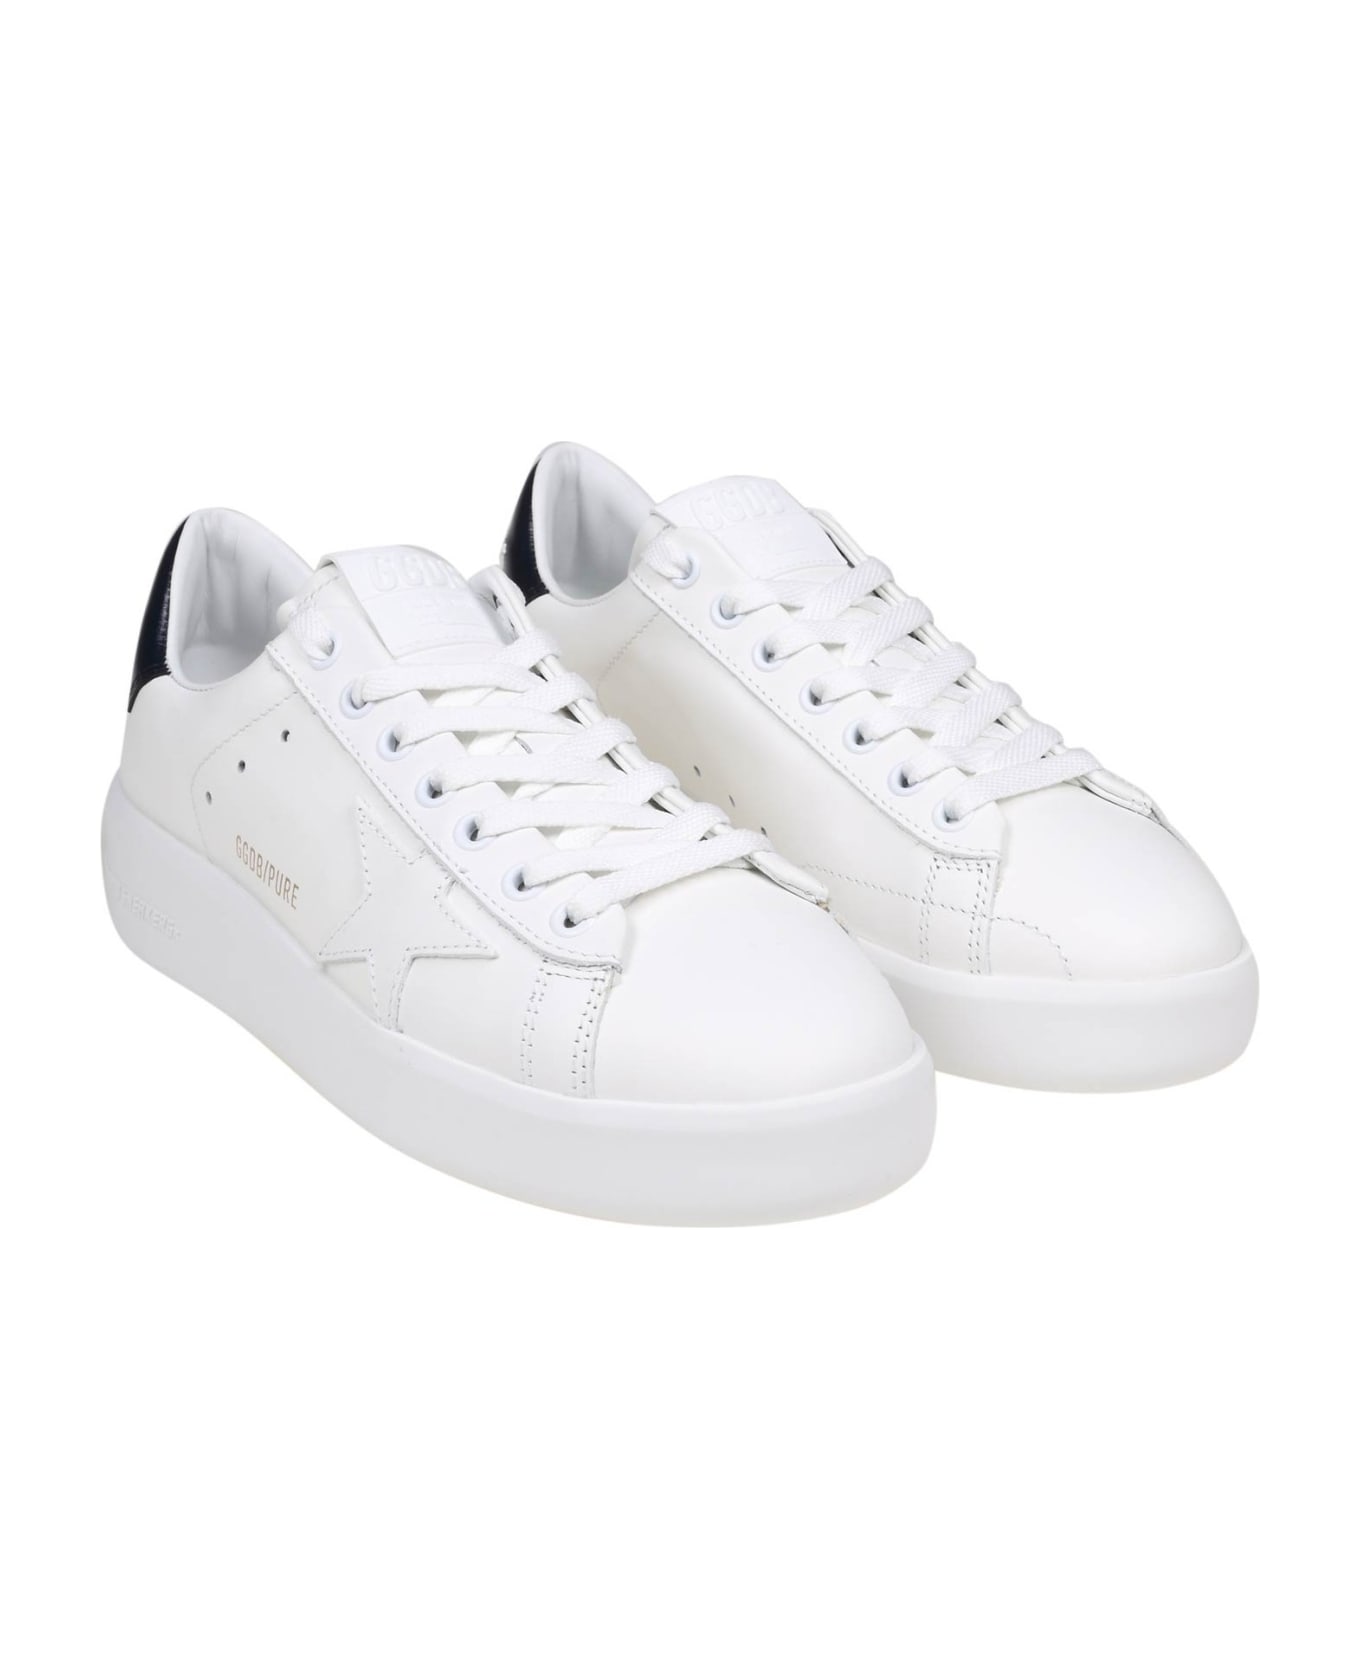 Golden Goose Pure Star Sneakers - White/blue スニーカー